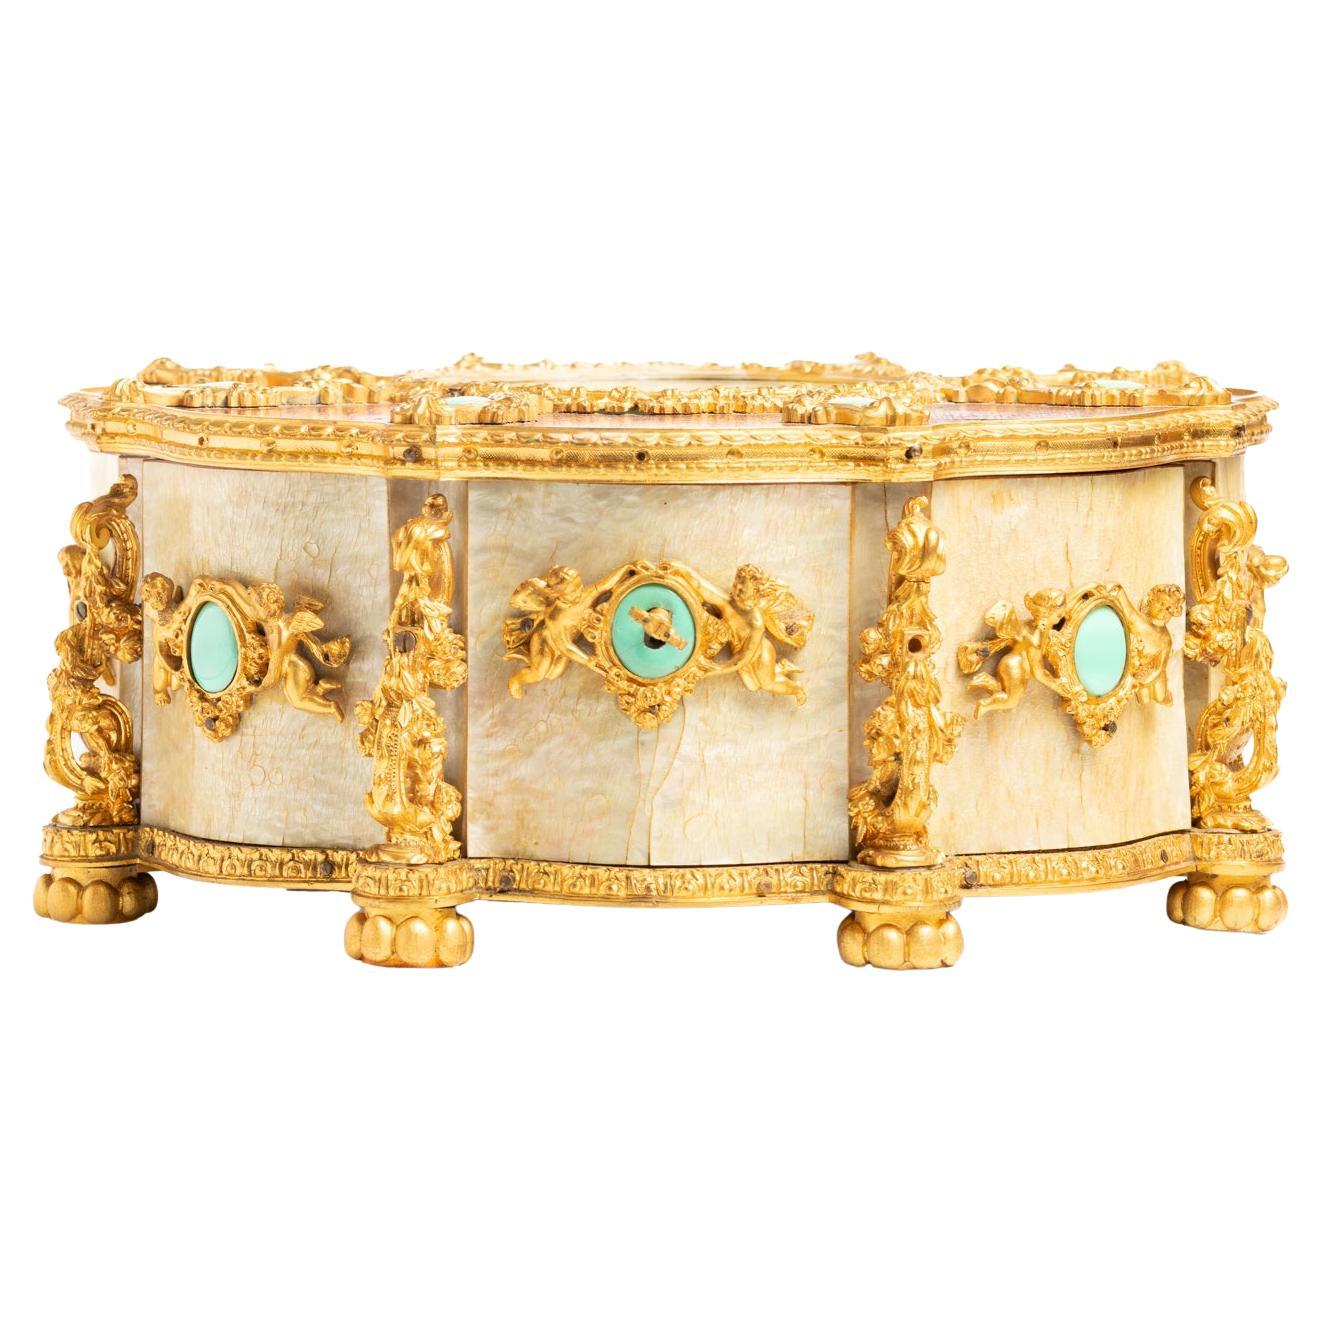 What is a jewelry box called?